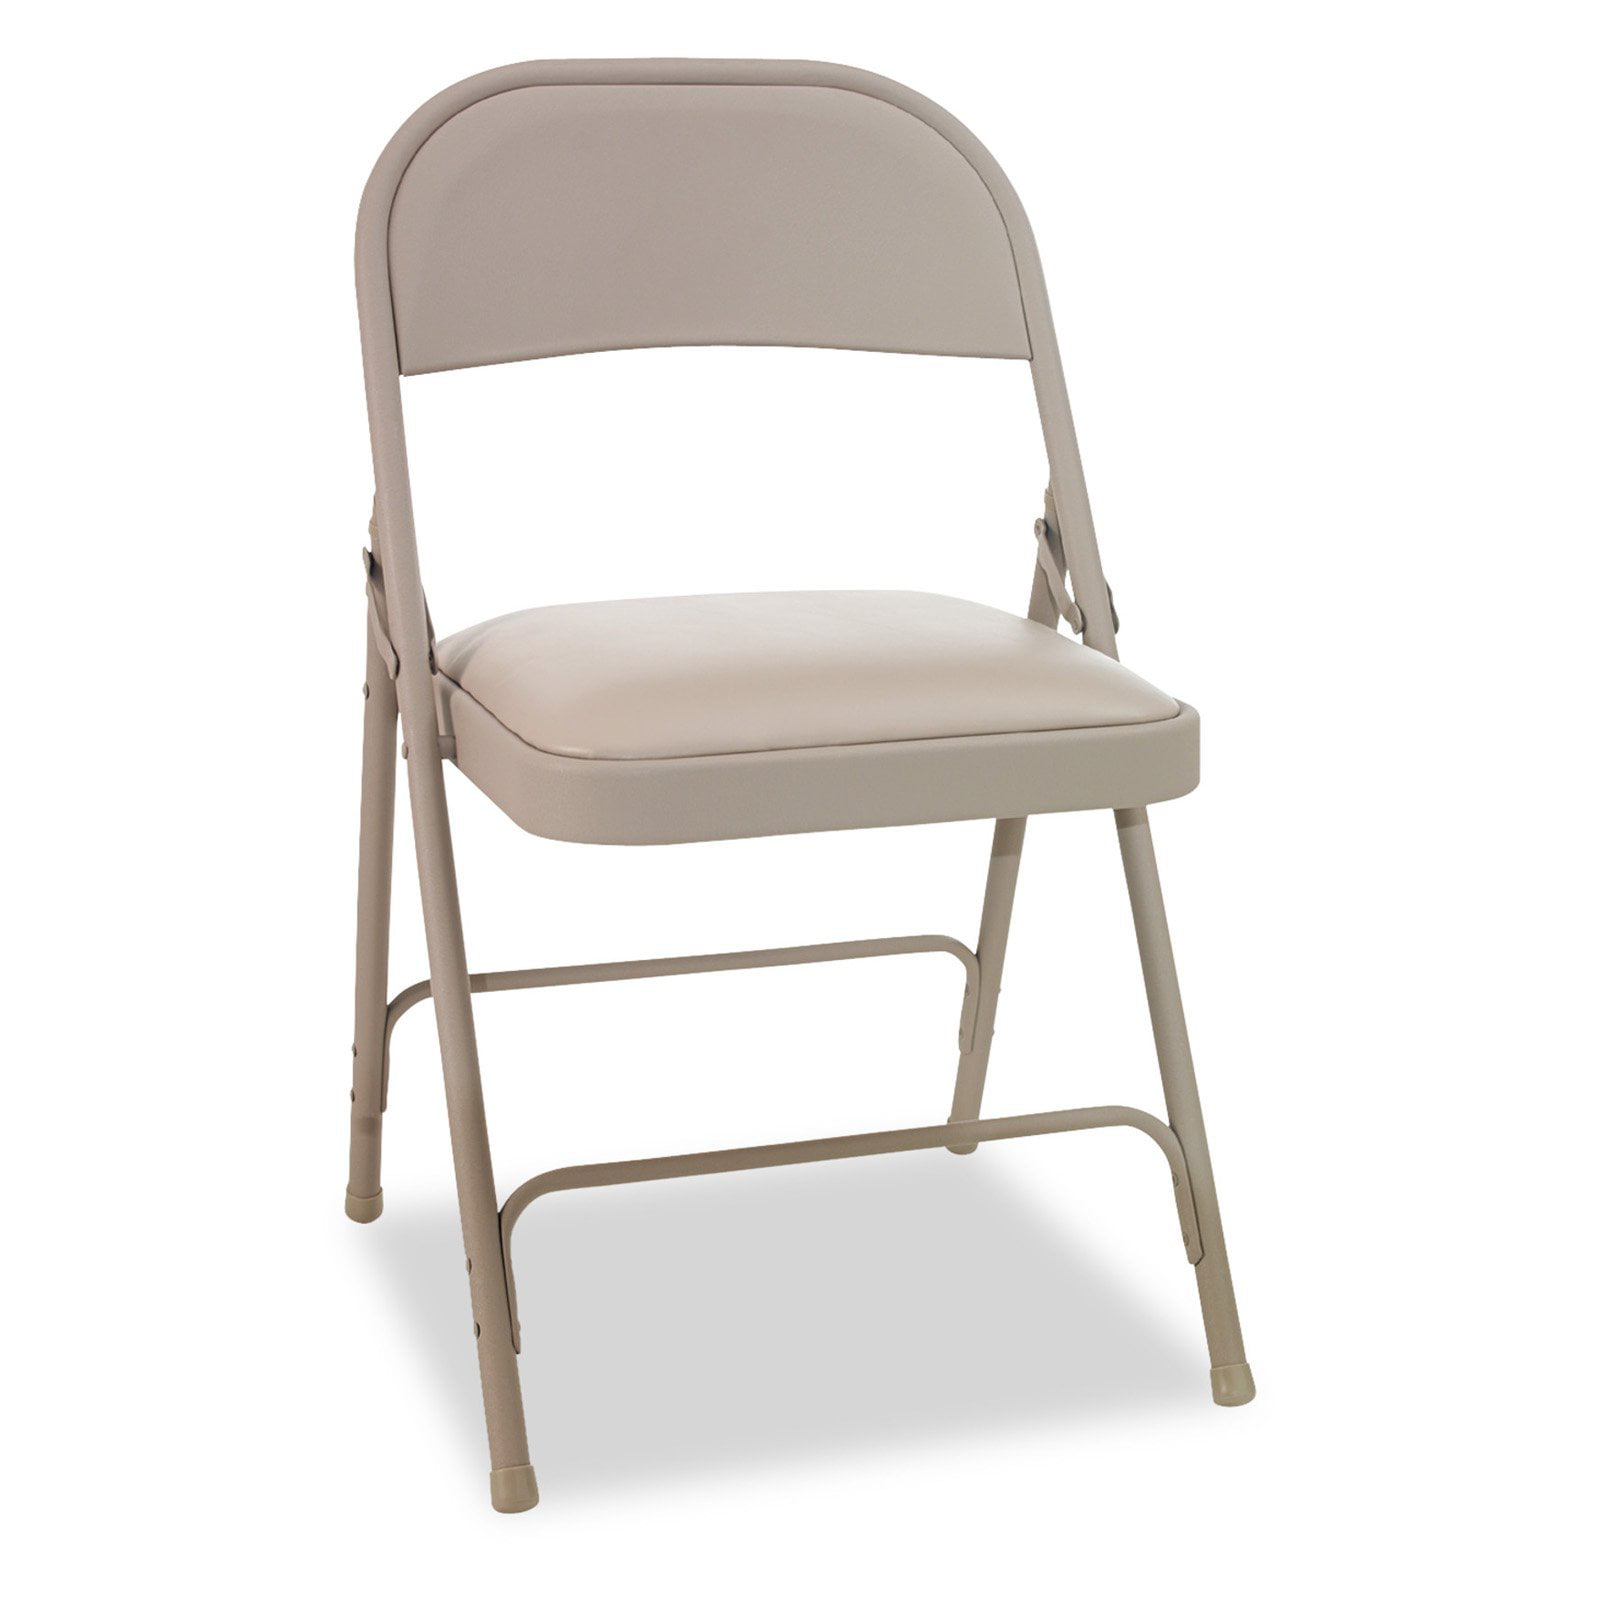 Alera Steel Folding Chair with Two-Brace Support, Padded Seat, Tan, 4